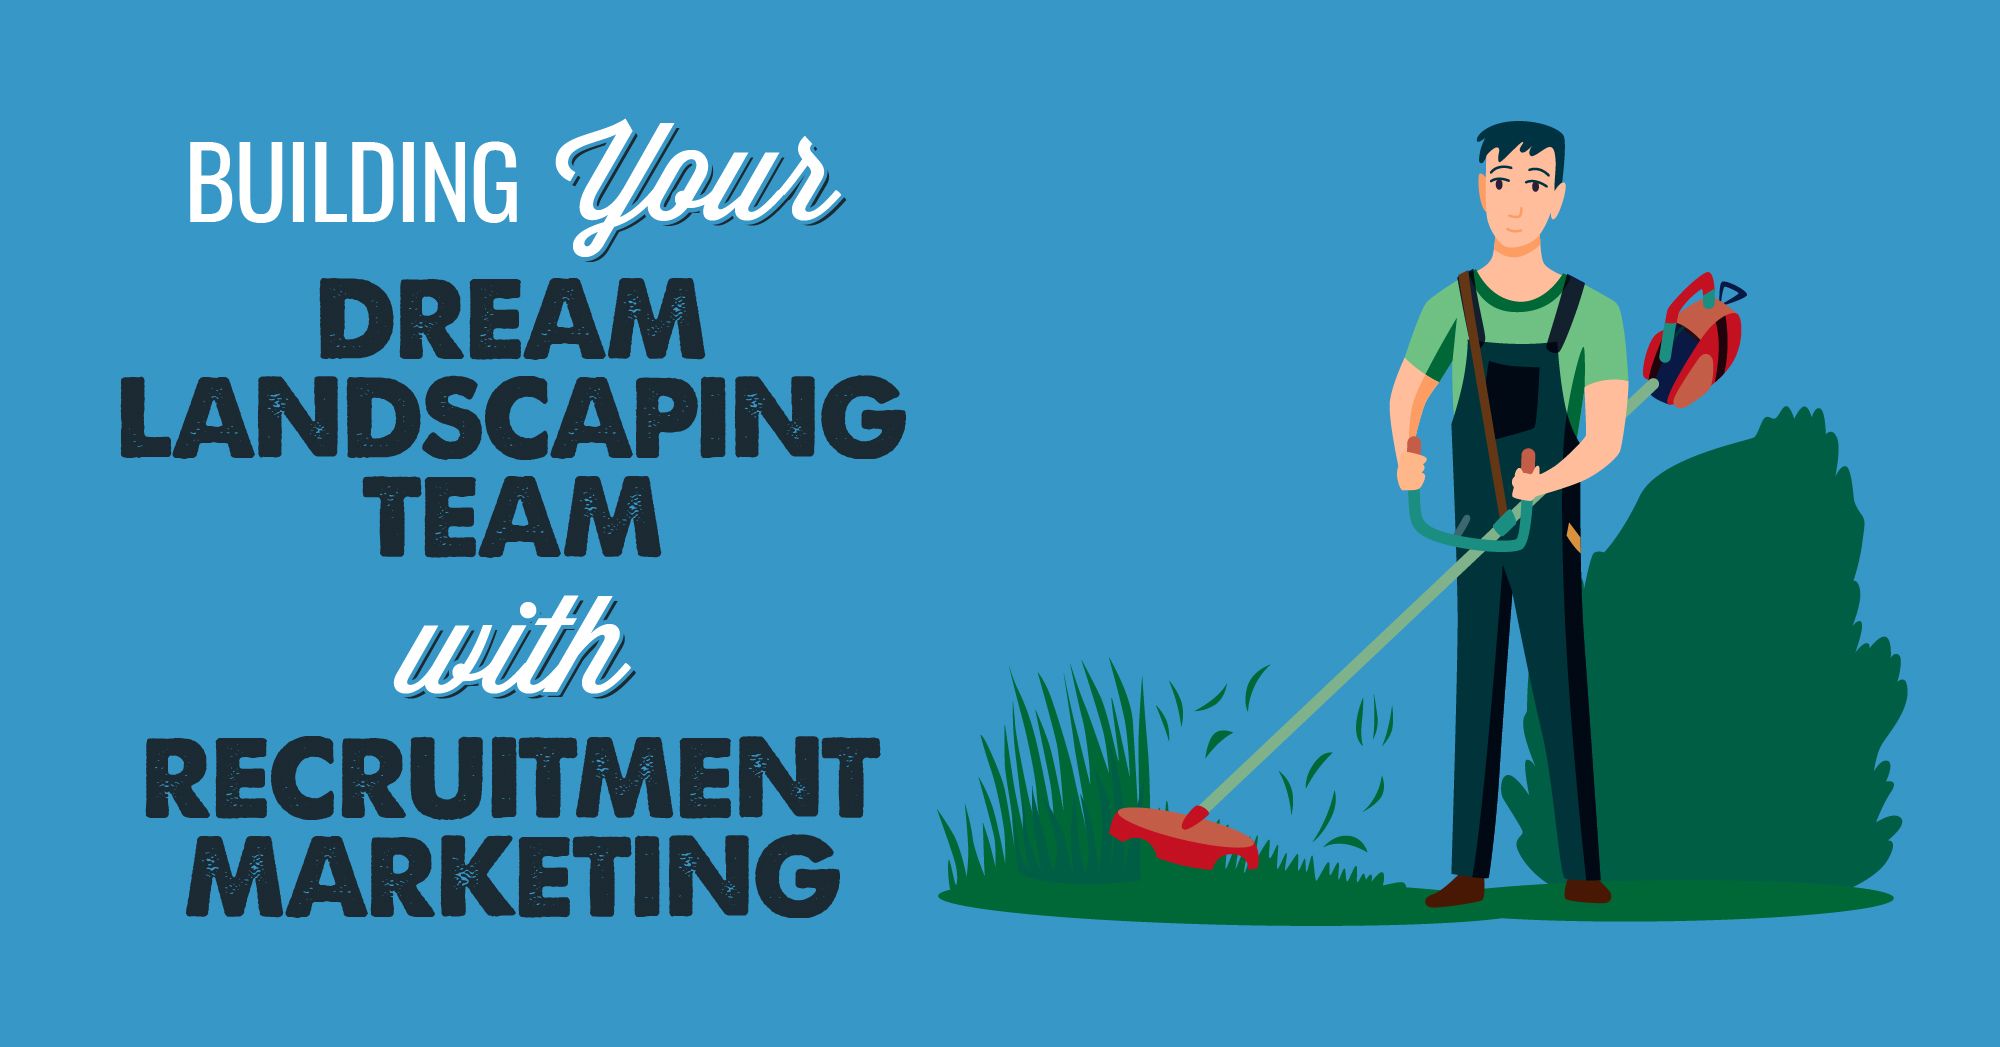 Building your dream landscaping team with recruitment marketing